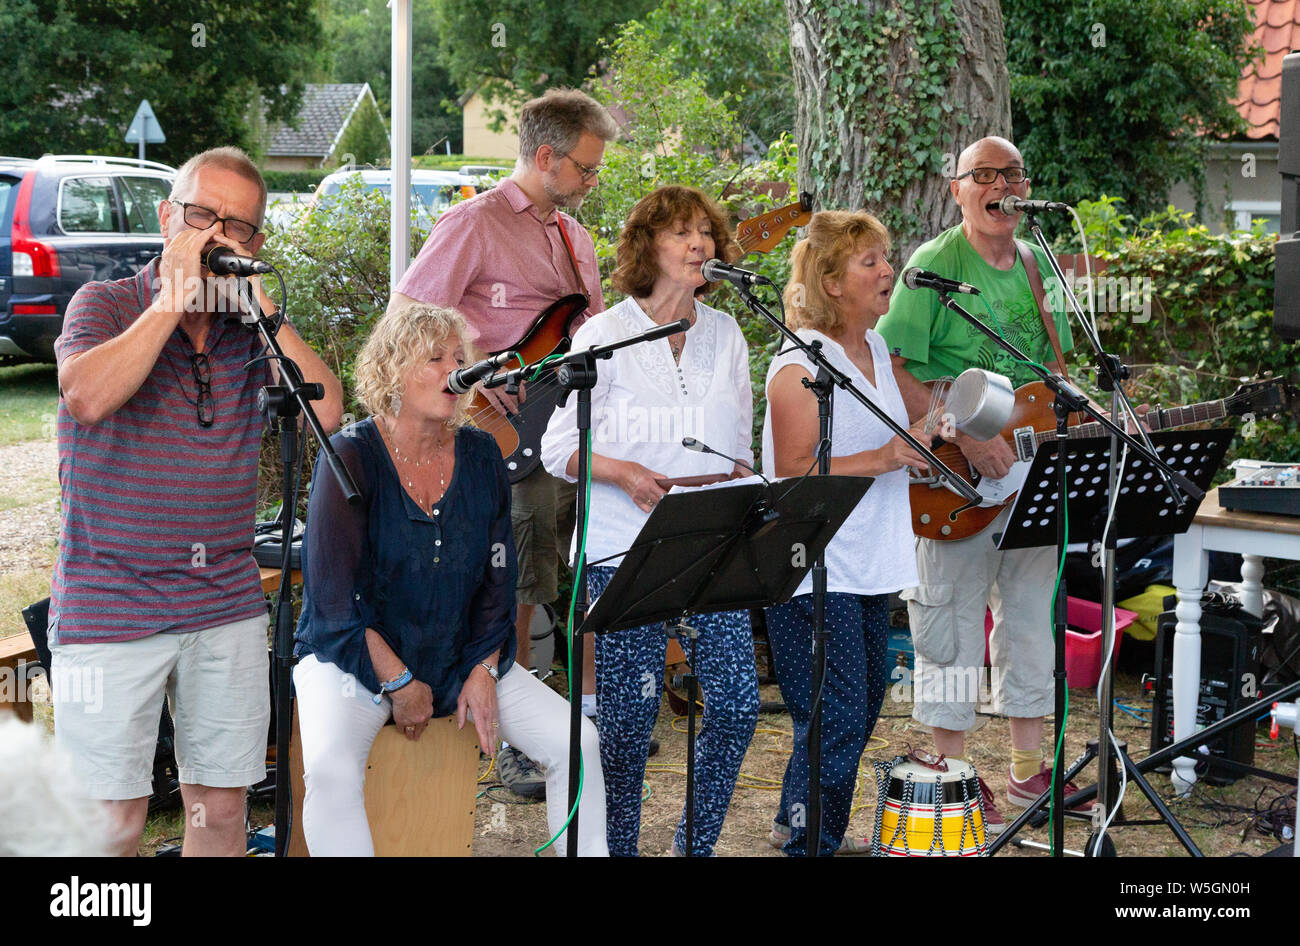 Retirement Lifestyle; A music band of a group of retired mature people aged 60s singing as a hobby in retirement, playing outdoors, Cambridgeshire UK Stock Photo